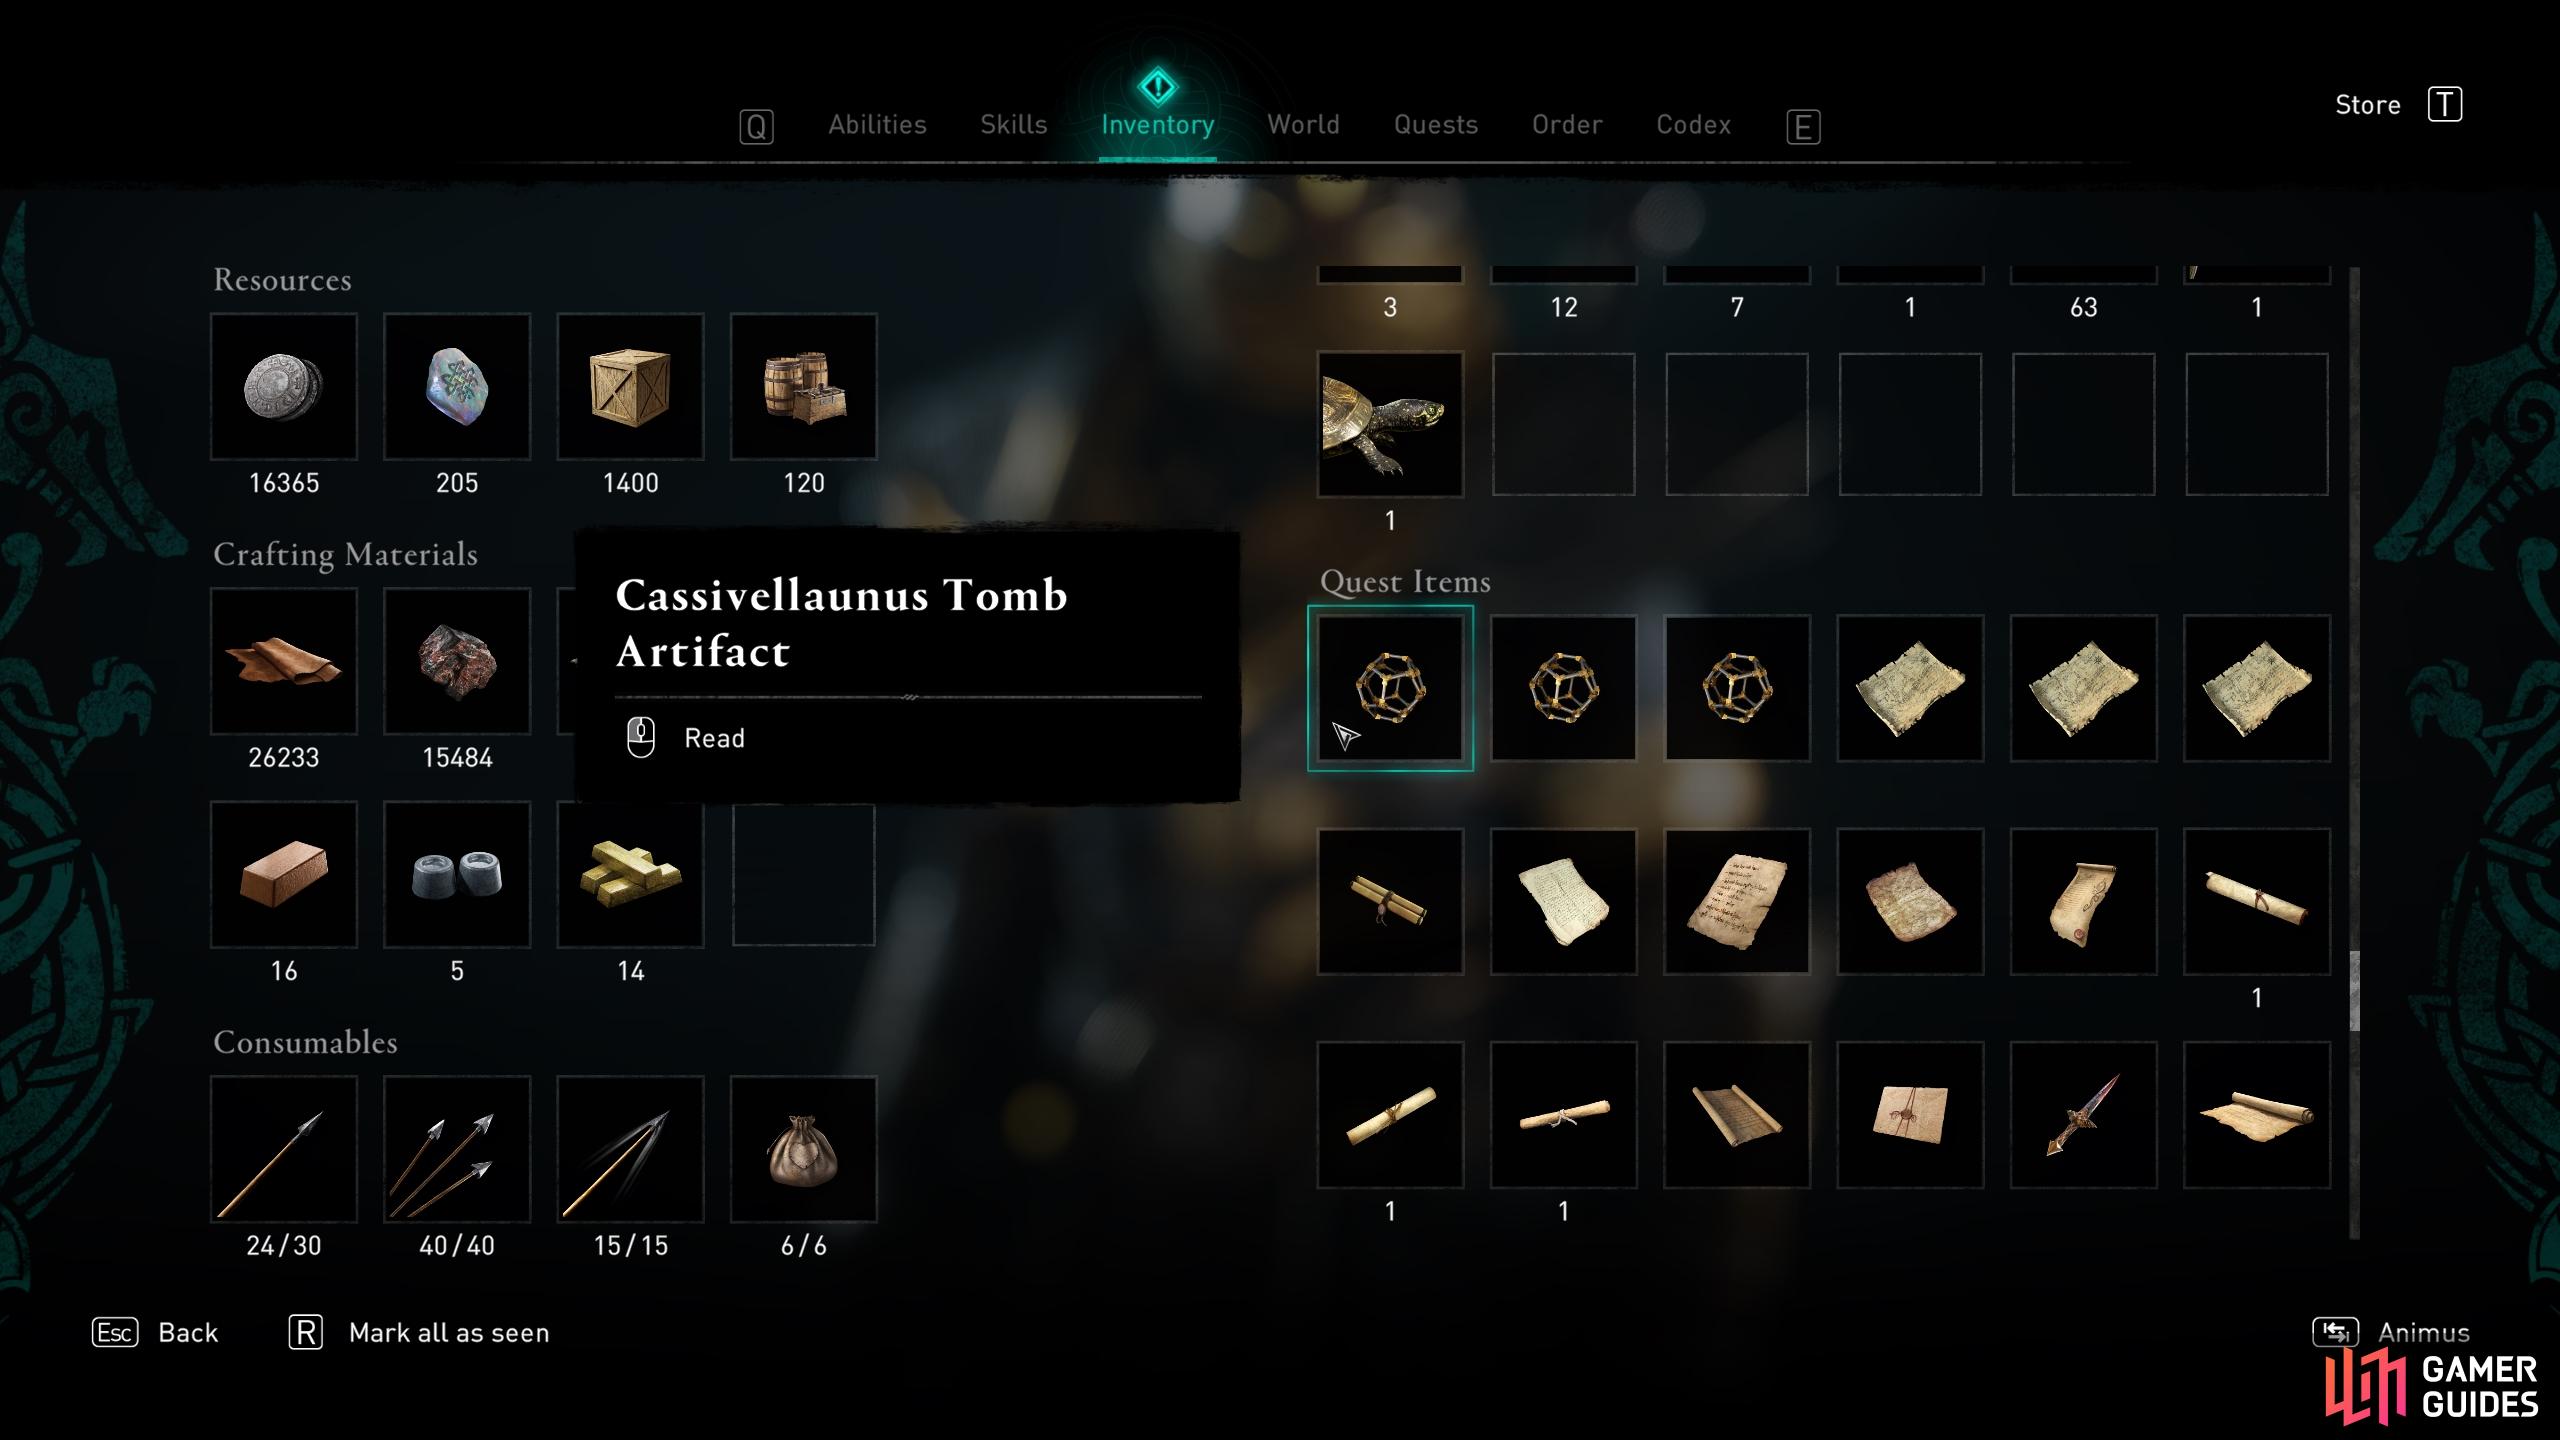 You'll find the artifacts in your inventory once you've looted them.